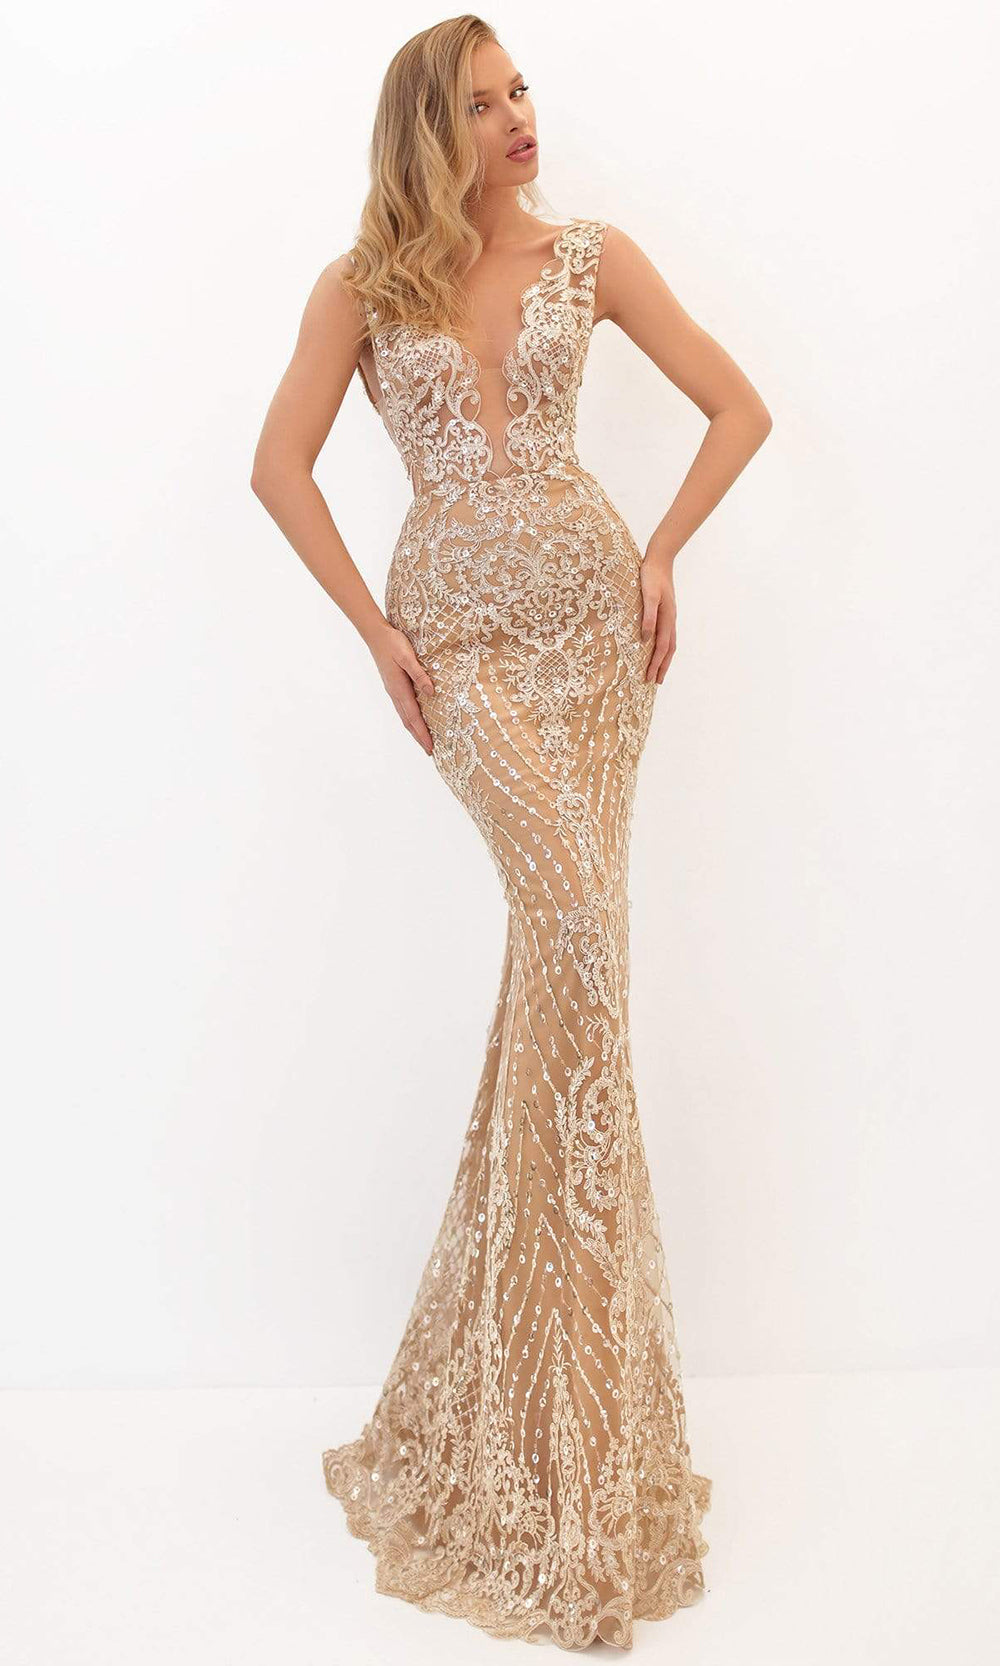 Tarik Ediz - Scalloped Plunging Bodice Embroidered Mermaid Gown 50648 - 1 pc Ivory In Size 6 Available CCSALE 6 / Gold